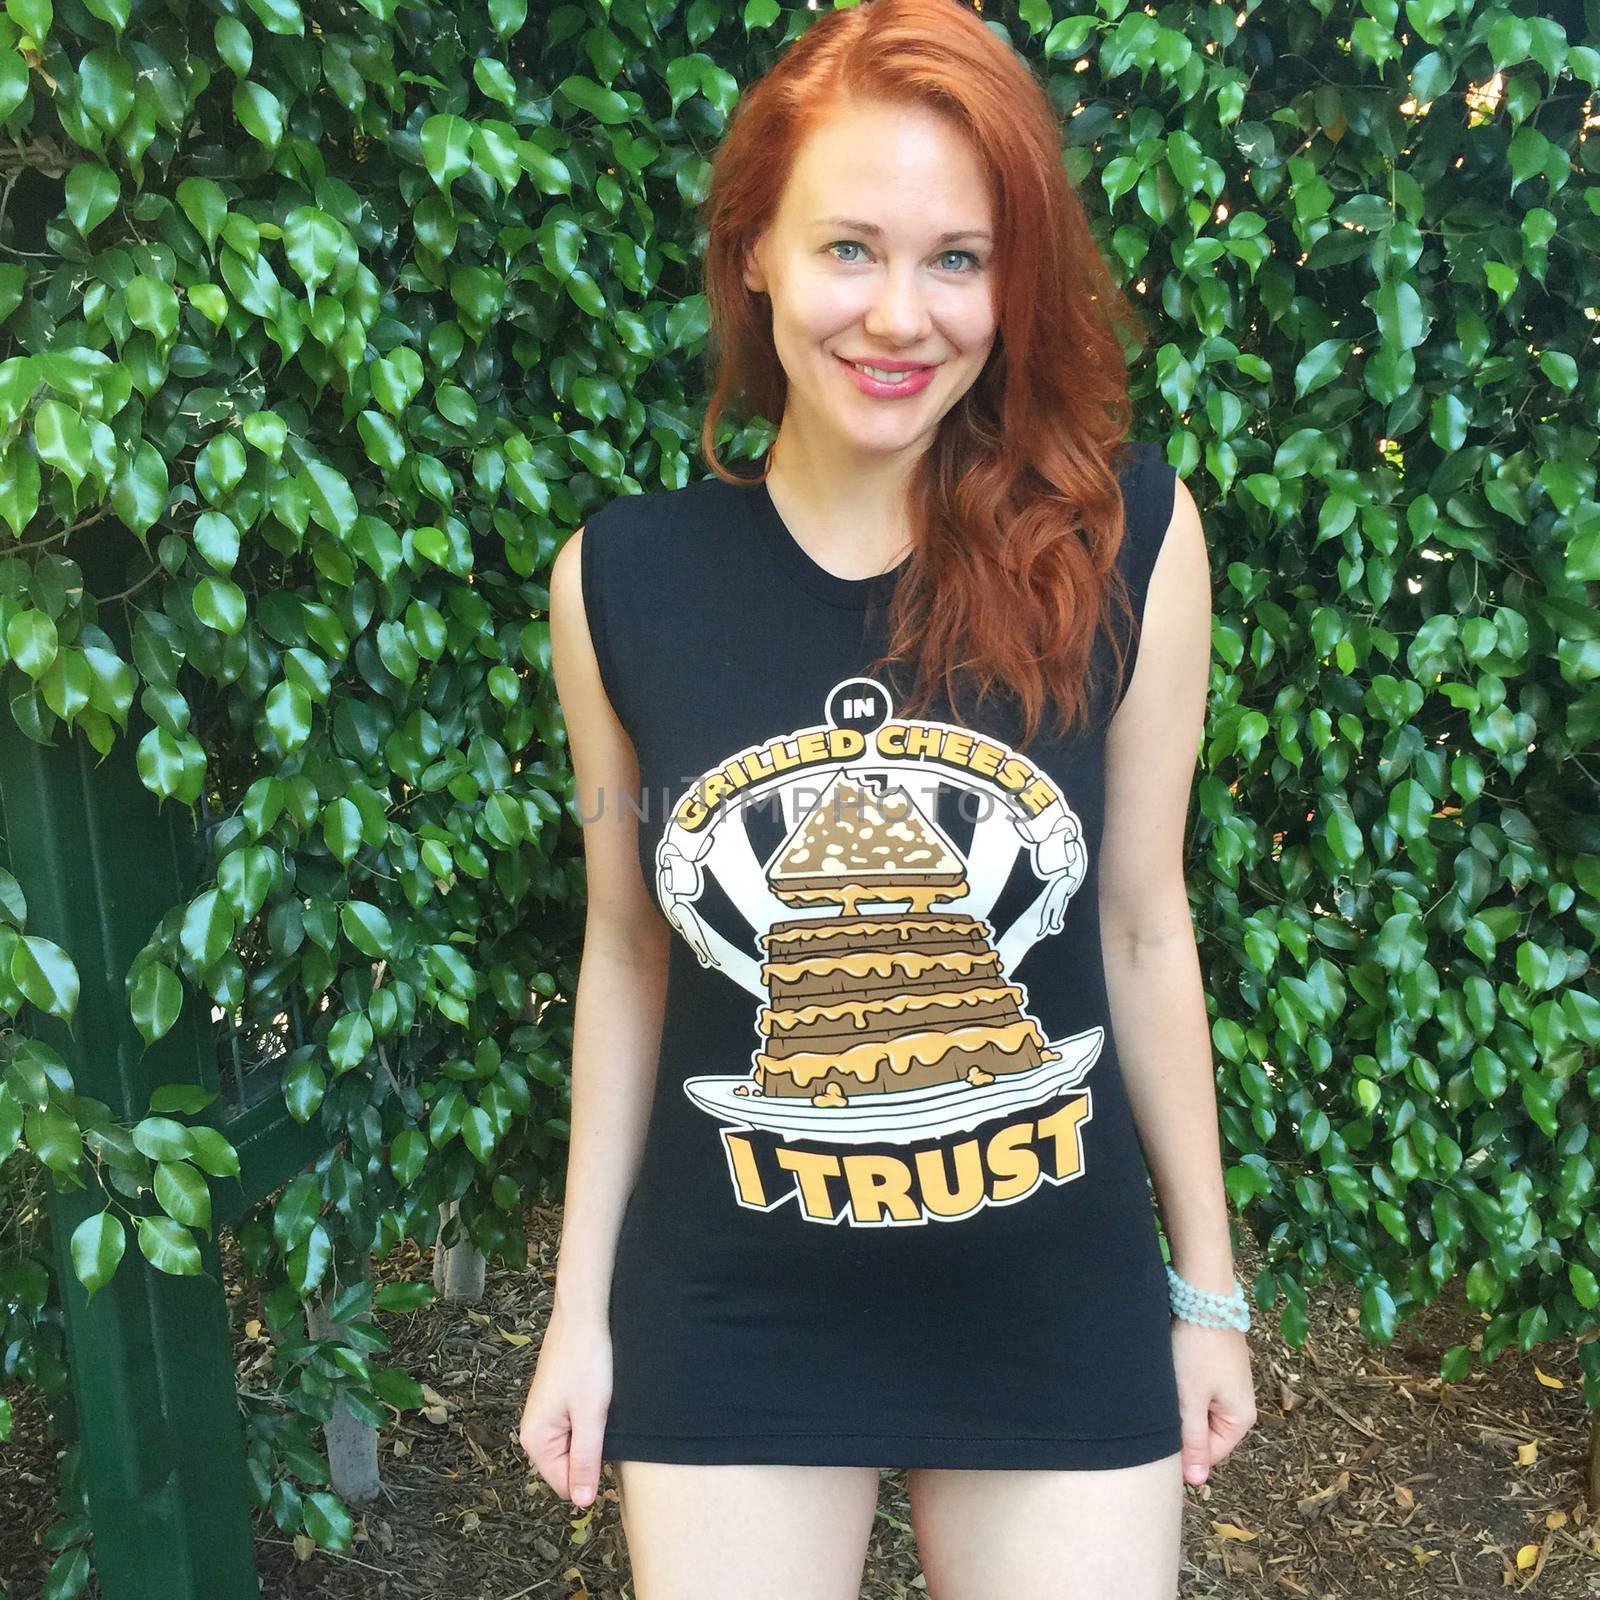 Maitland Ward Looking Cute in her Grilled Cheese T-Shirt, Private Location, Los Angeles, CA 09-03-15